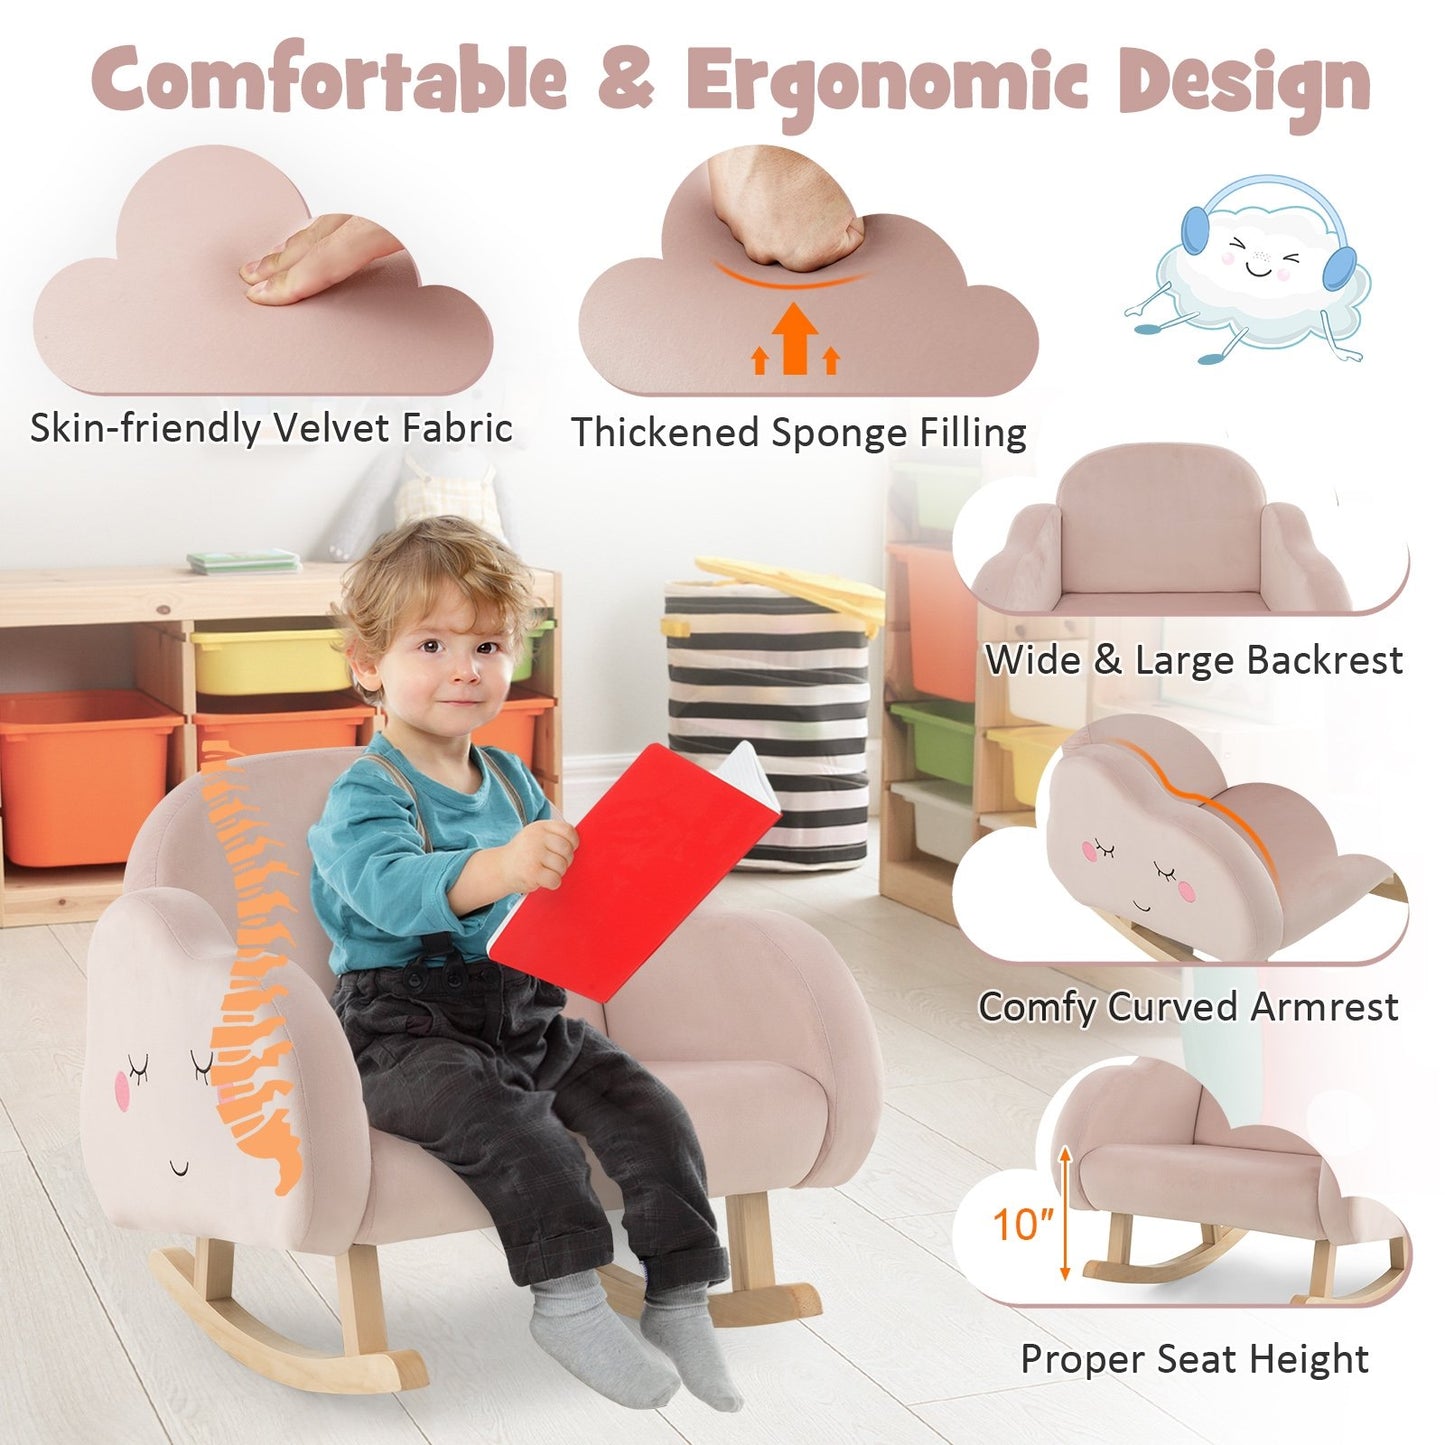 Upholstered Toddler Rocker with Solid Wood Legs and Non-slip Foot Pads, Pink